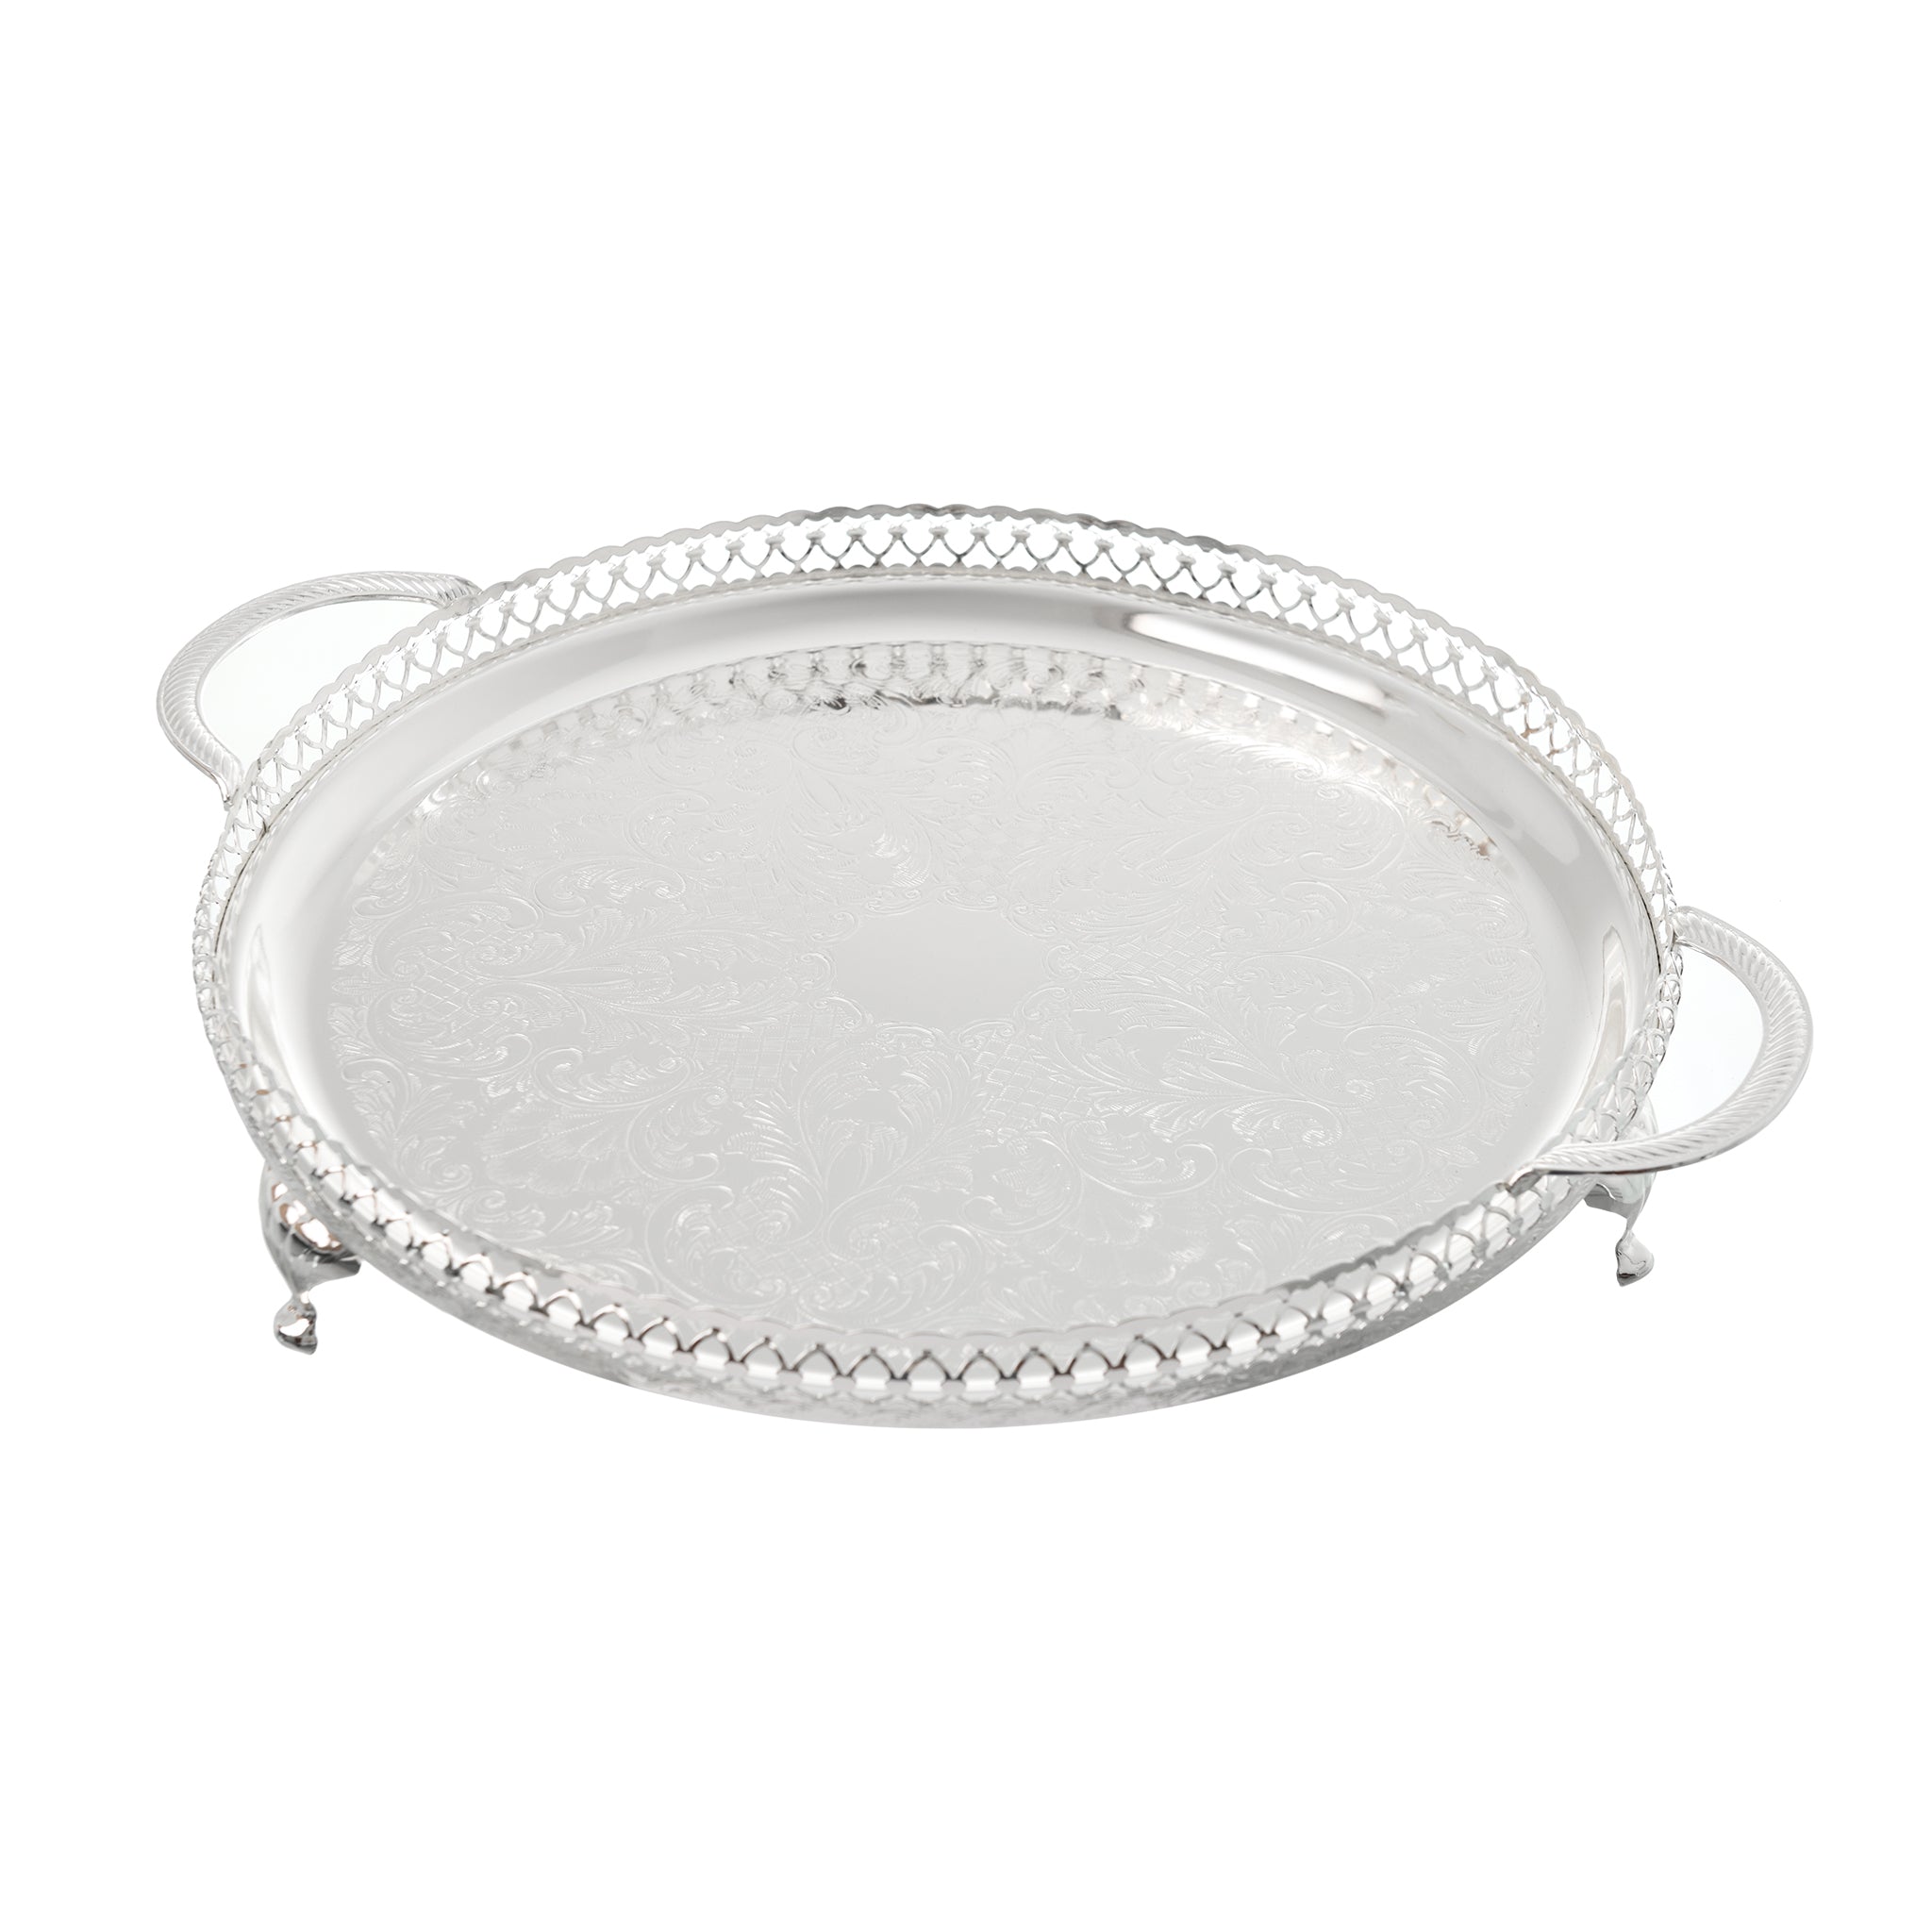 Queen Anne - Round Tray with Legs & Handles - Silver Plated Metal - 35cm - 26000380